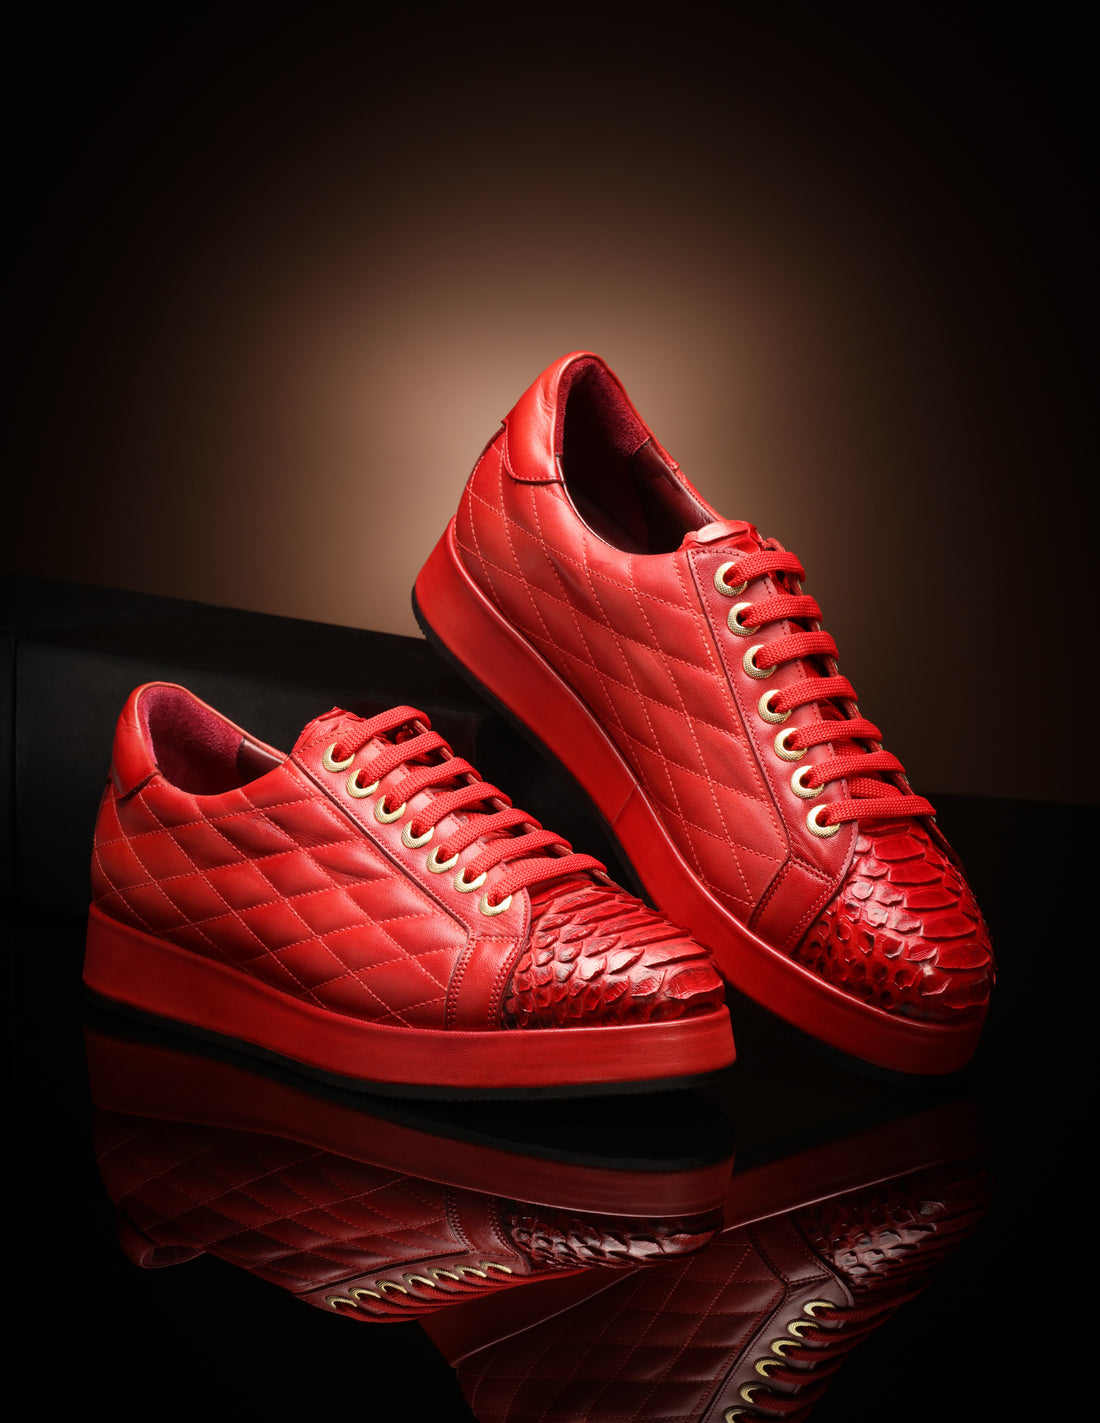 Danilo Python Sneakers - Ruby Red